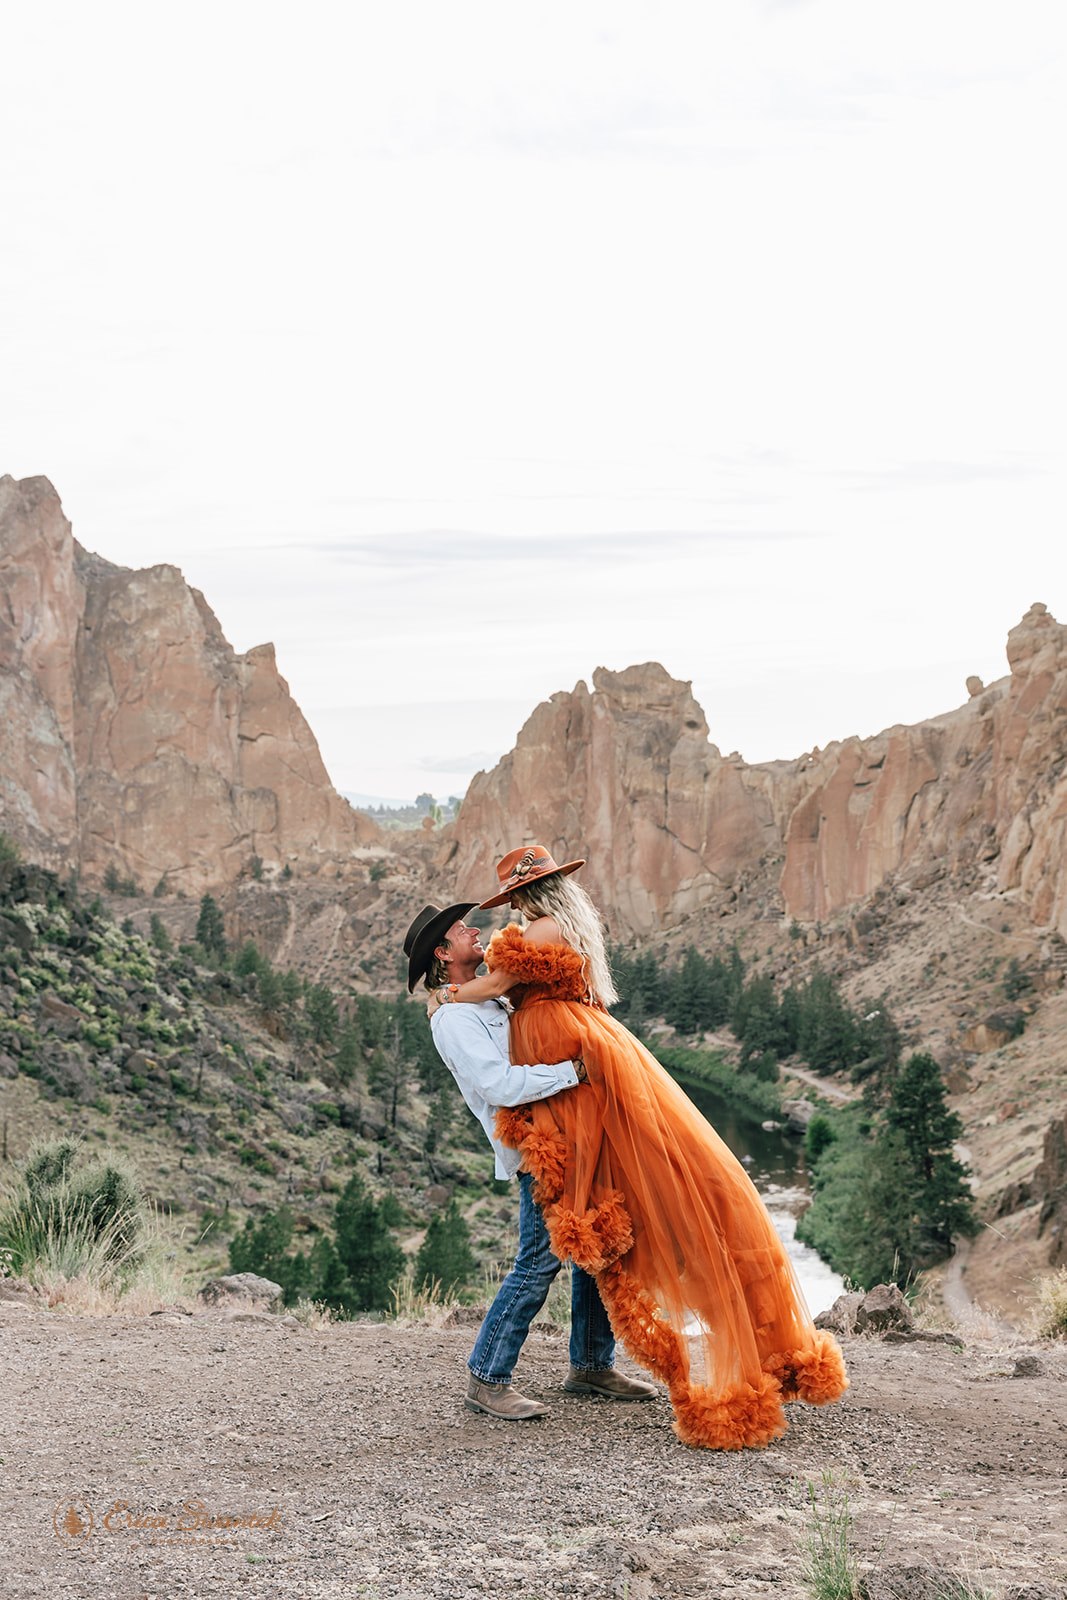 A western style wedding couple embrace at Smith Rock State Park, an intimate wedding location near Bend, Oregon.